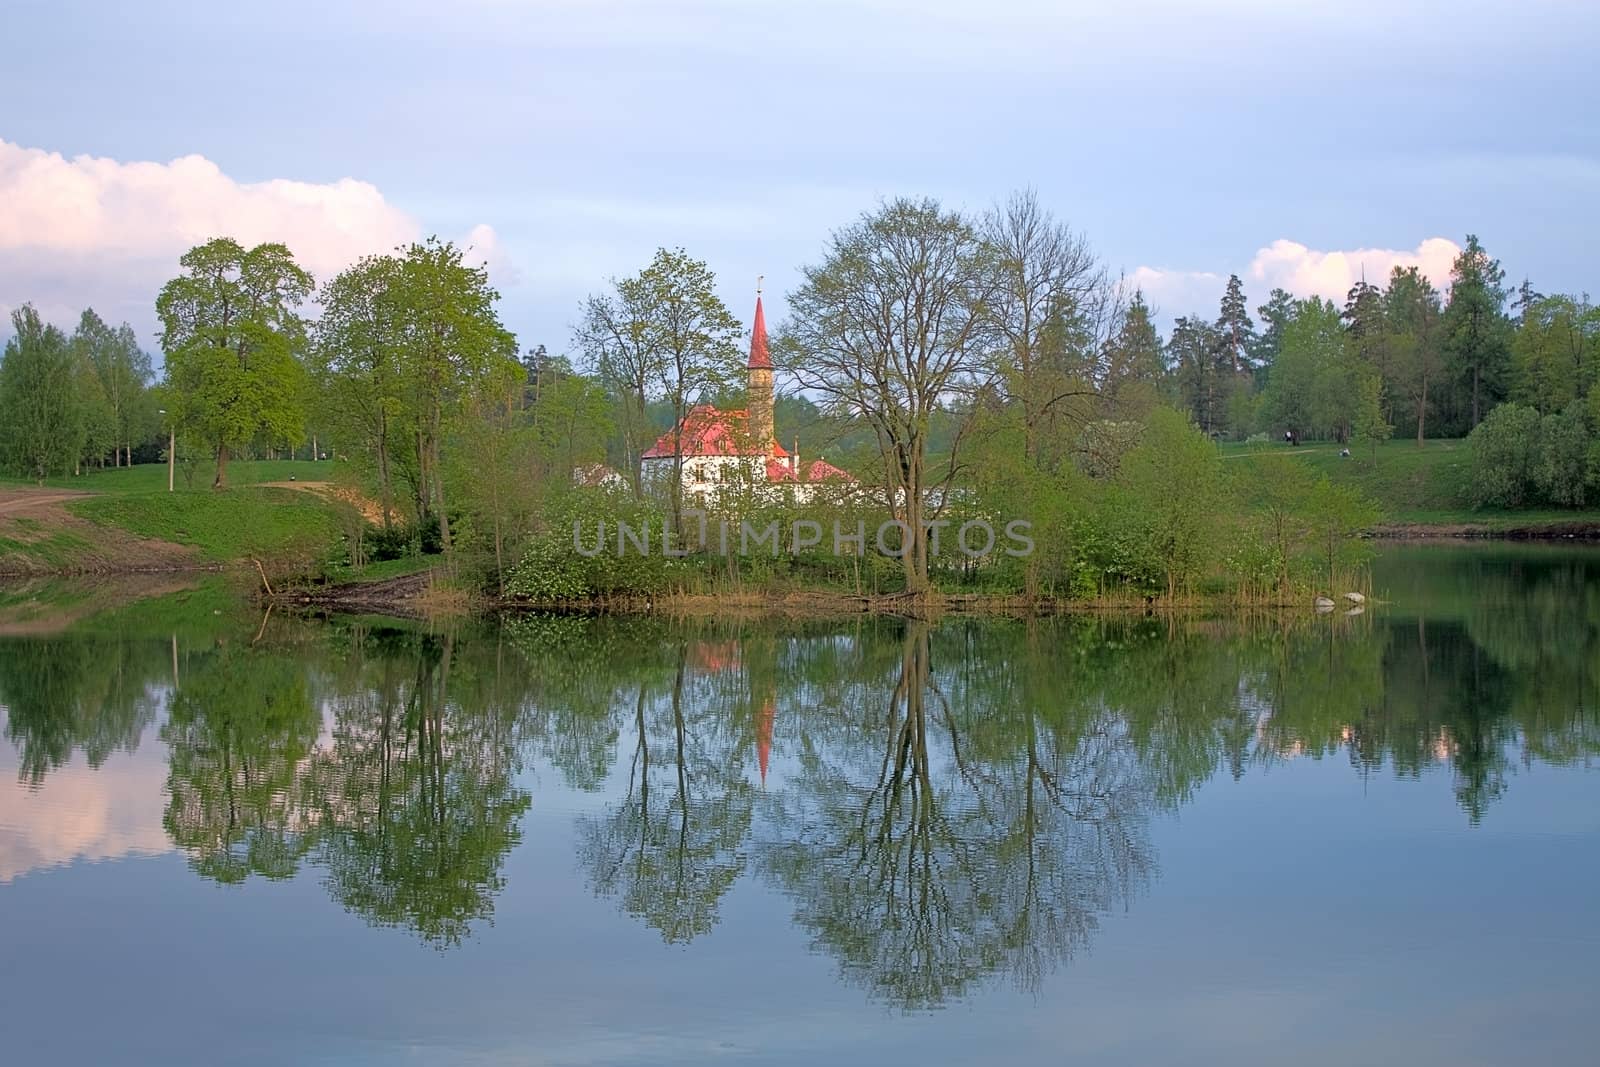 View of the Priory Palace and its reflection in the lake, Gatchina, Russia